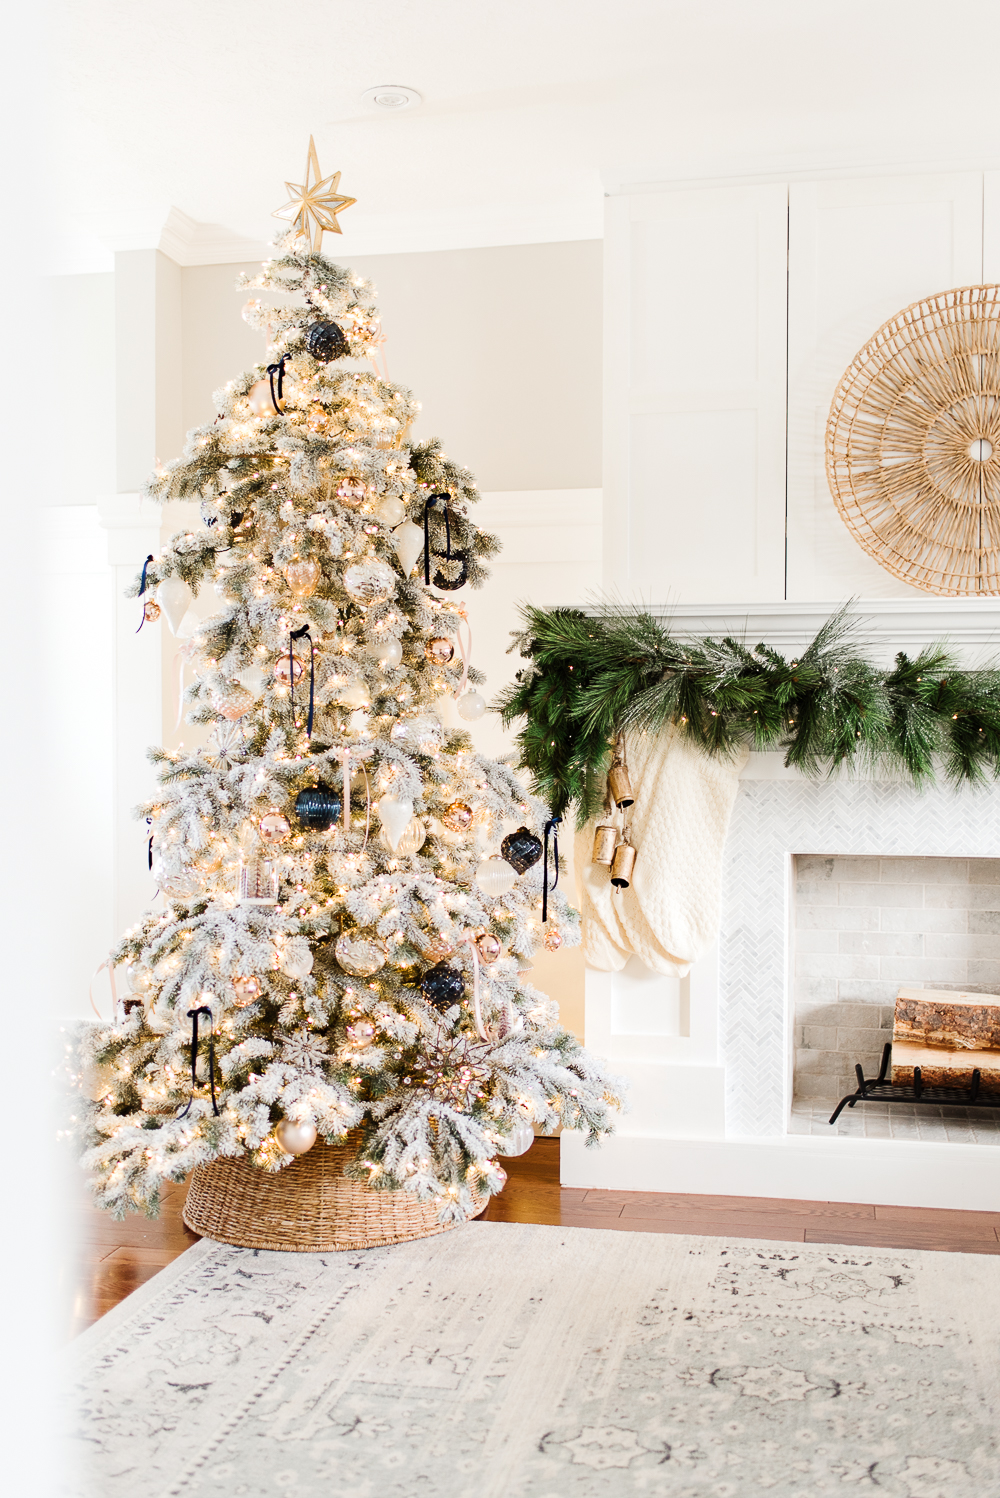 Step by Step Guide to Decorating a Beautiful Christmas Tree - Nick + Alicia